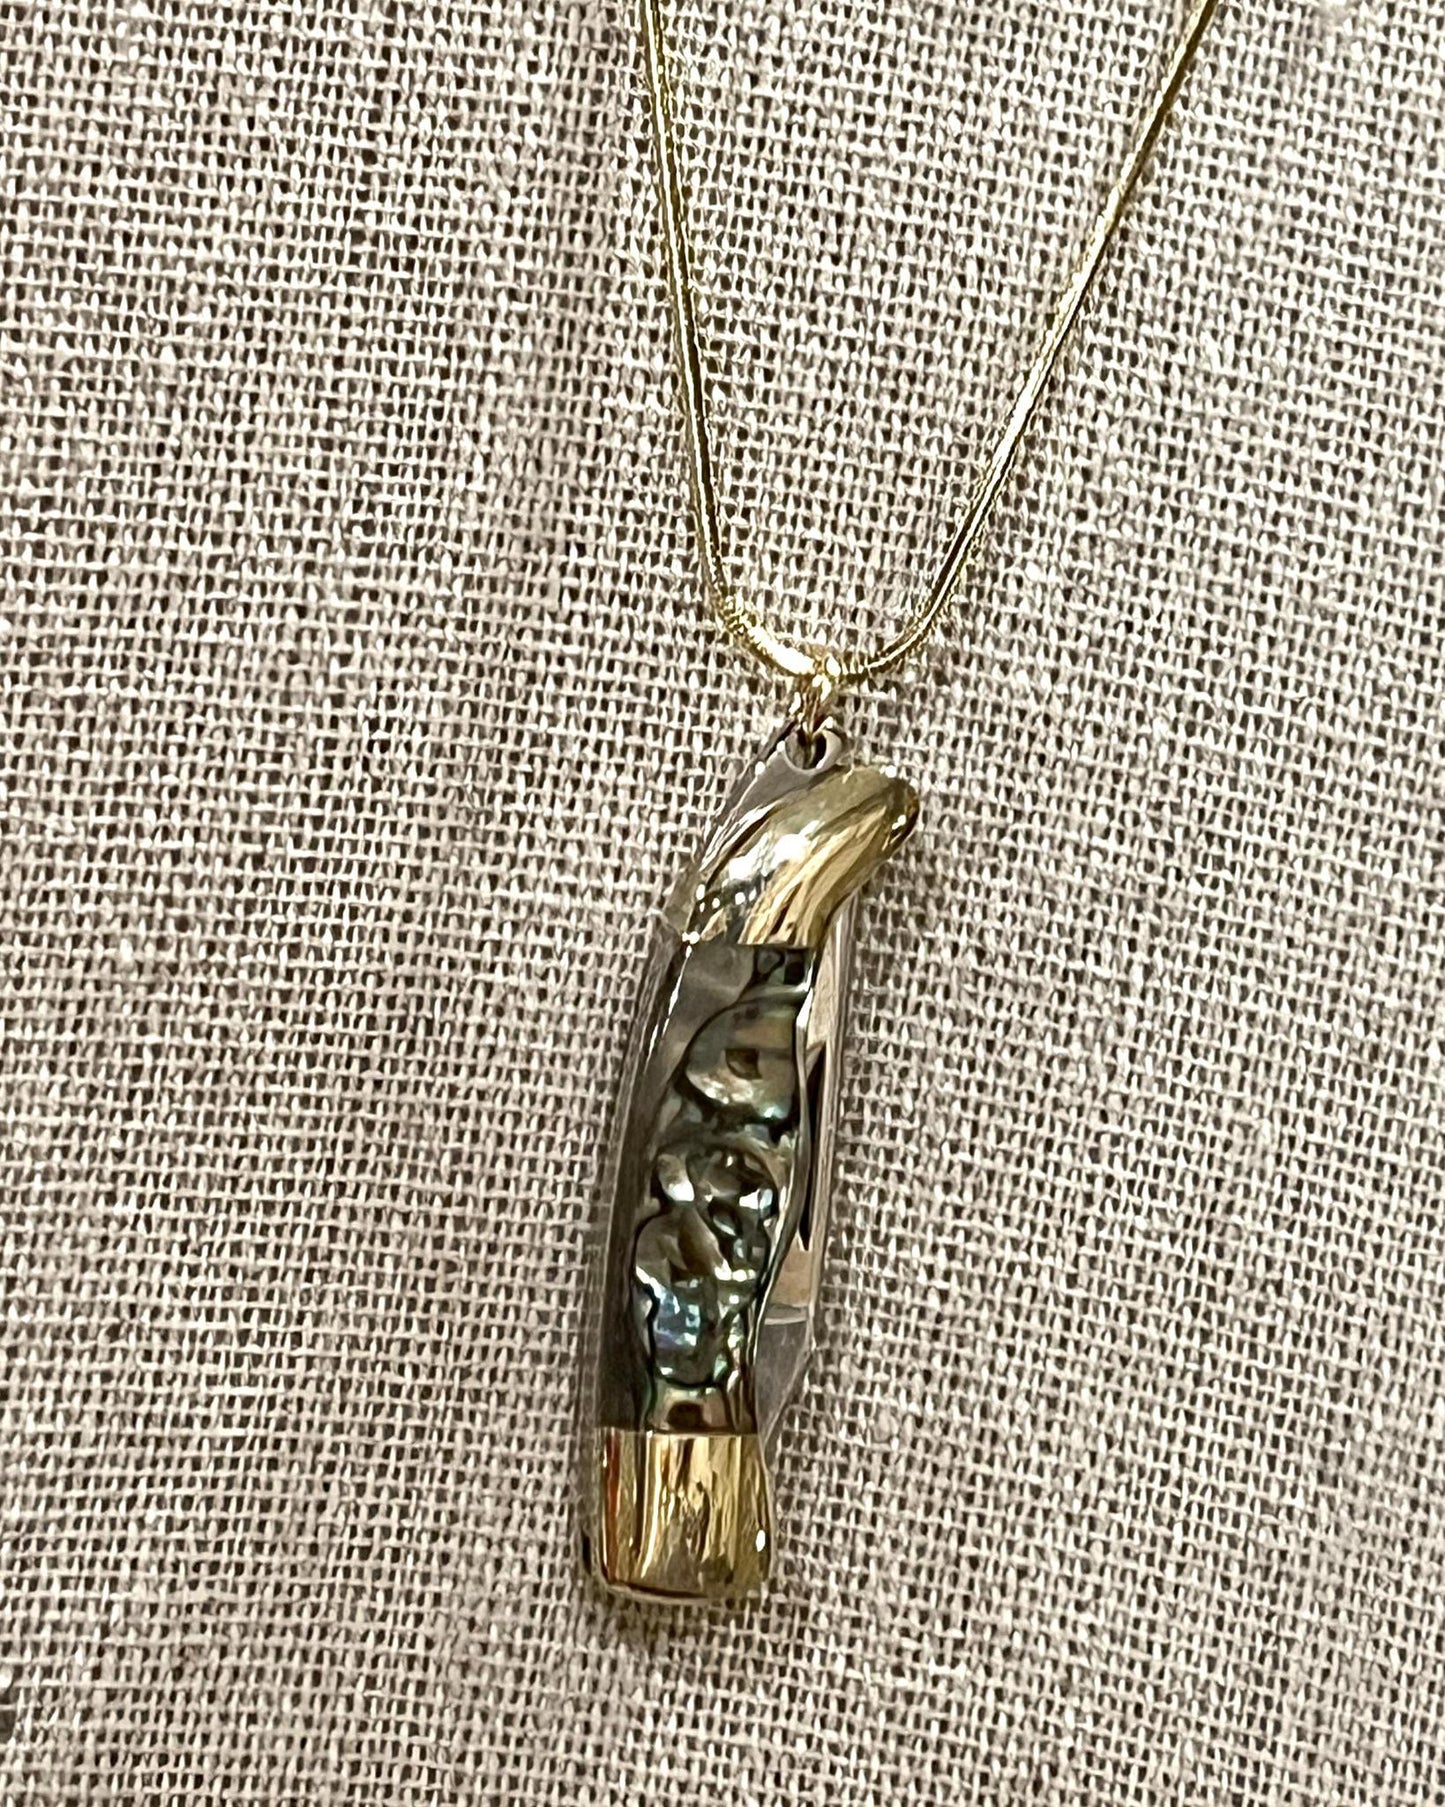 1979 Jewelry Knife Necklace 1.5 inch Multi Colored Abalone - 14kt GF chain